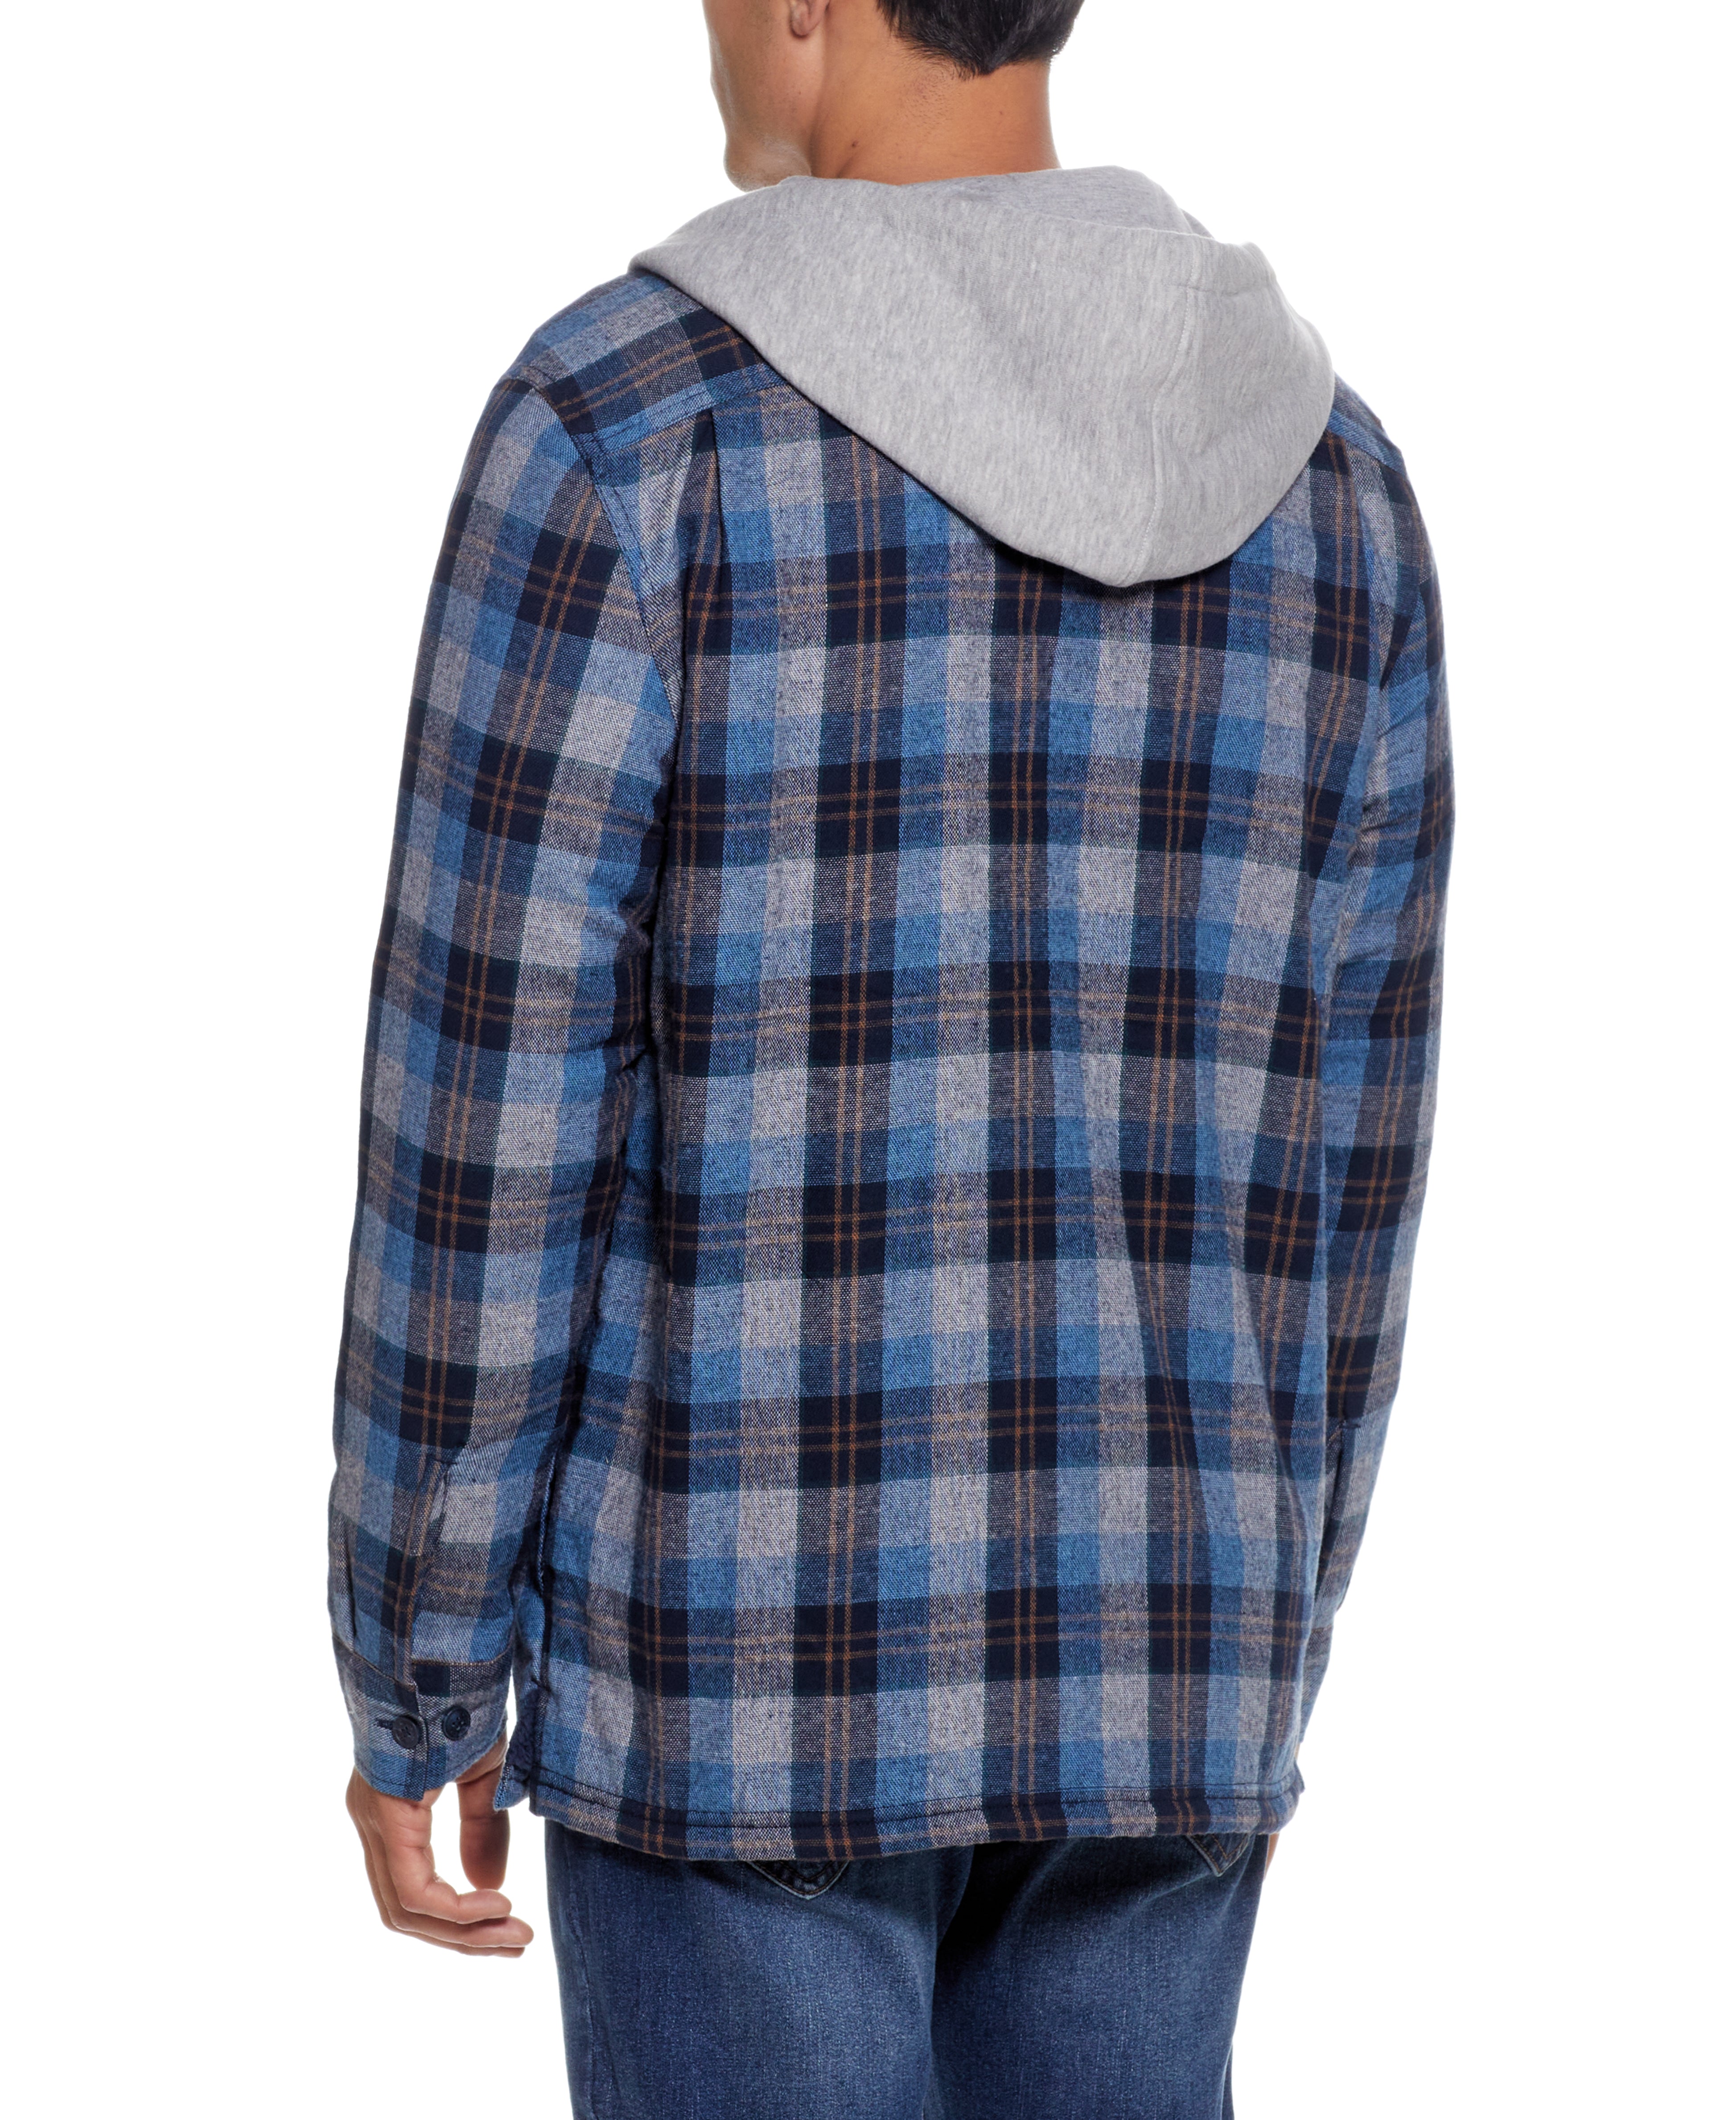 SHERPA LINED HOODED SHIRT JACKET in BLUE